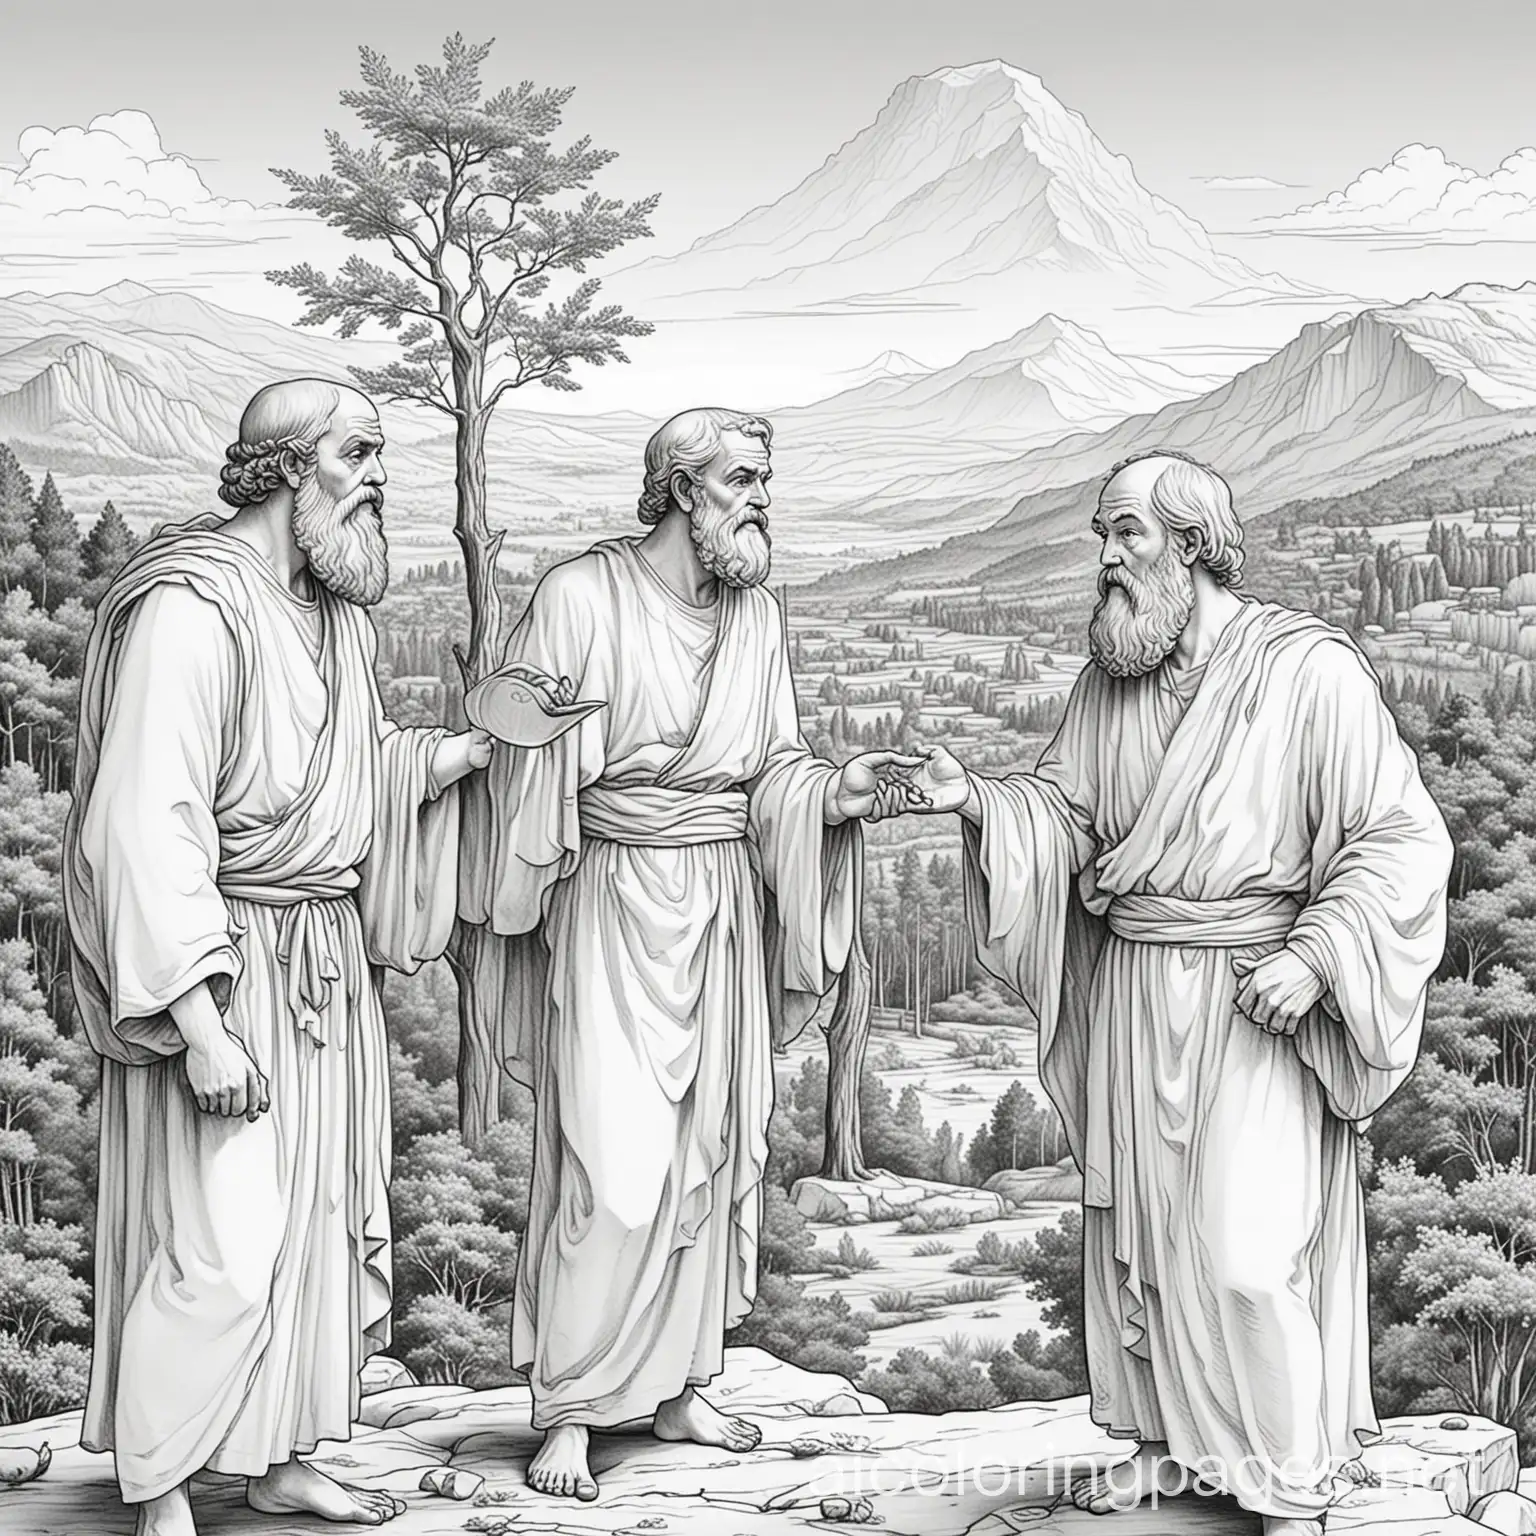 plato, socrates, and aristotle arguing about philosophy with trees and mountains in the background
, Coloring Page, black and white, line art, white background, Simplicity, Ample White Space. The background of the coloring page is plain white to make it easy for young children to color within the lines. The outlines of all the subjects are easy to distinguish, making it simple for kids to color without too much difficulty